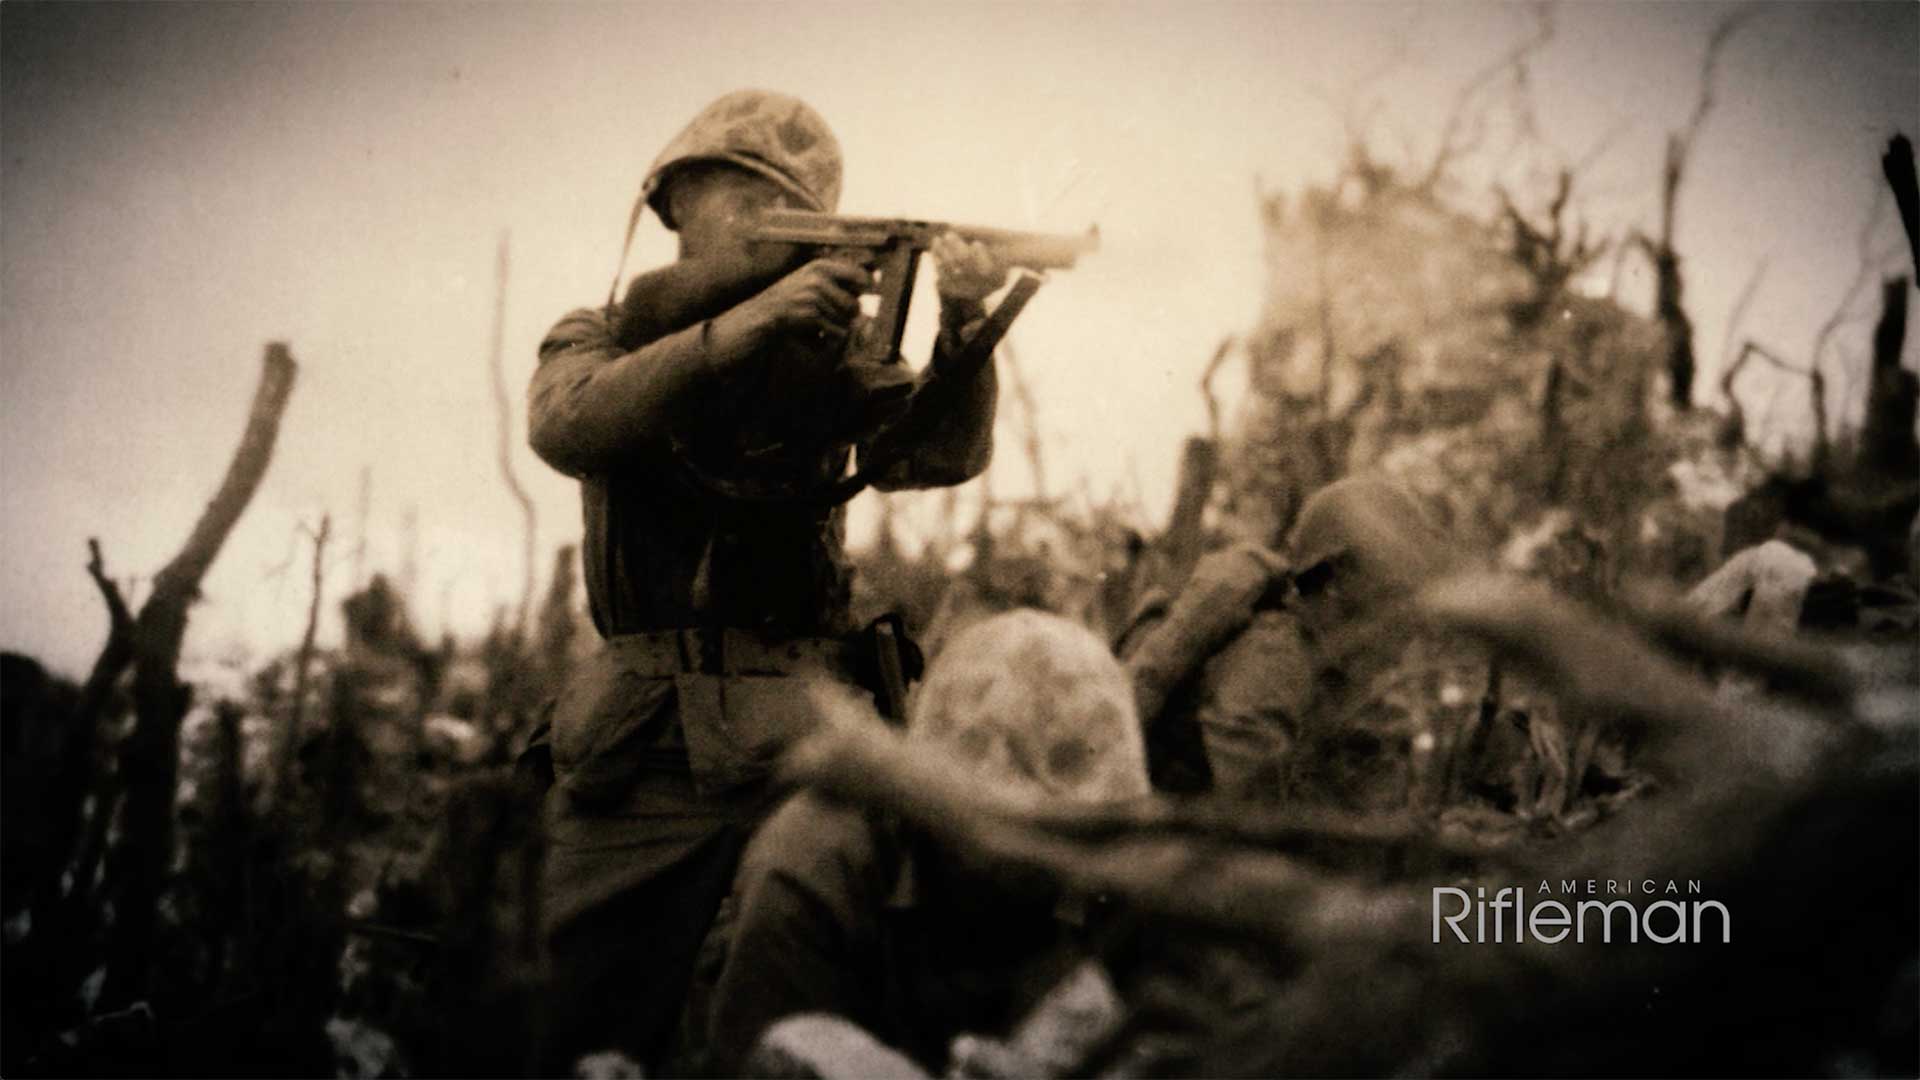 A World War II Marine fires a Thompson submachine gun during combat in the South Pacific.